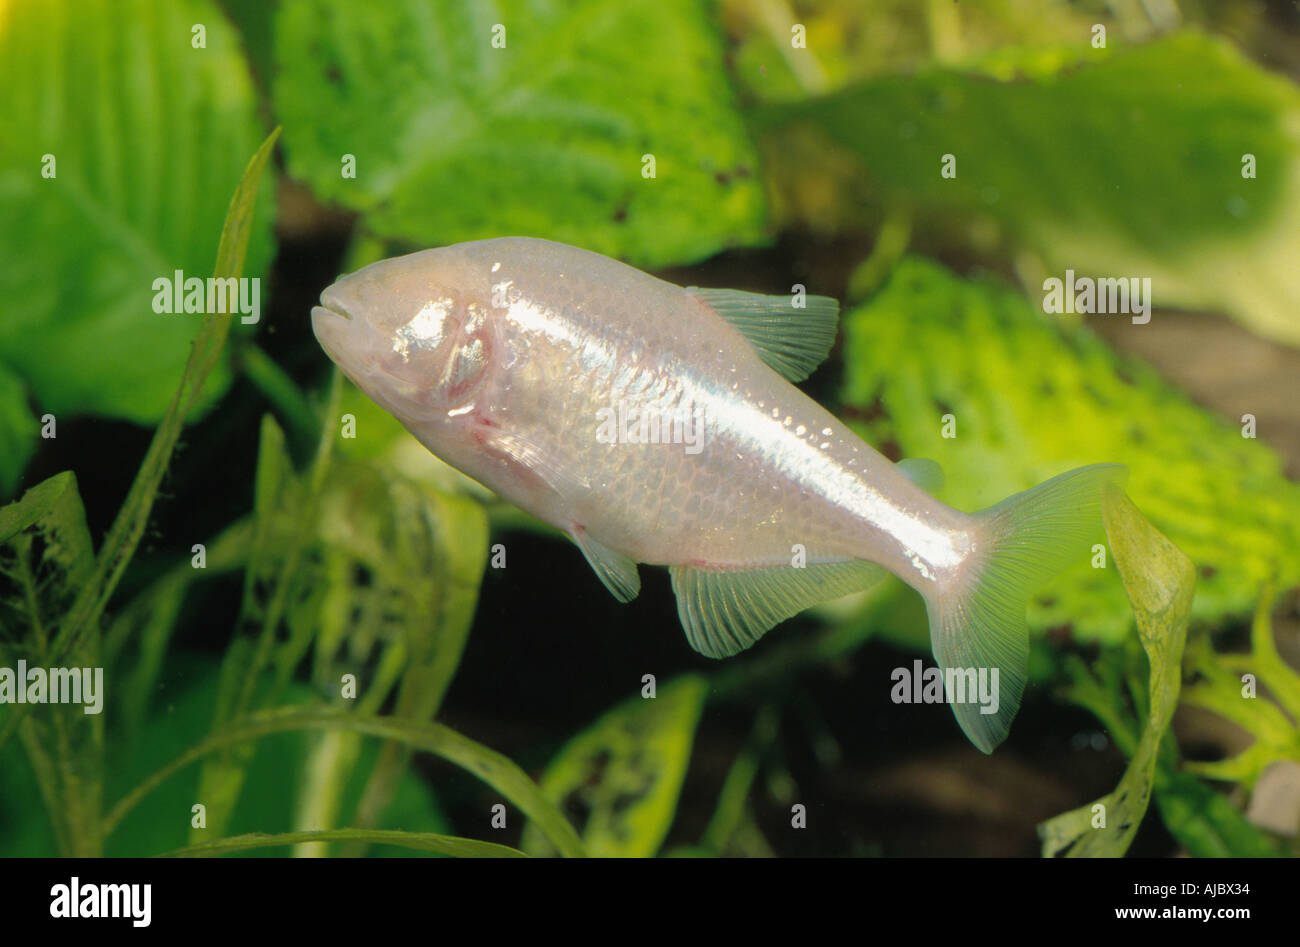 blind cave tetra, blind cavefish (Anoptichthys jordani, Astyanax fasciatus mexicanus), swimming in front of water plants Stock Photo